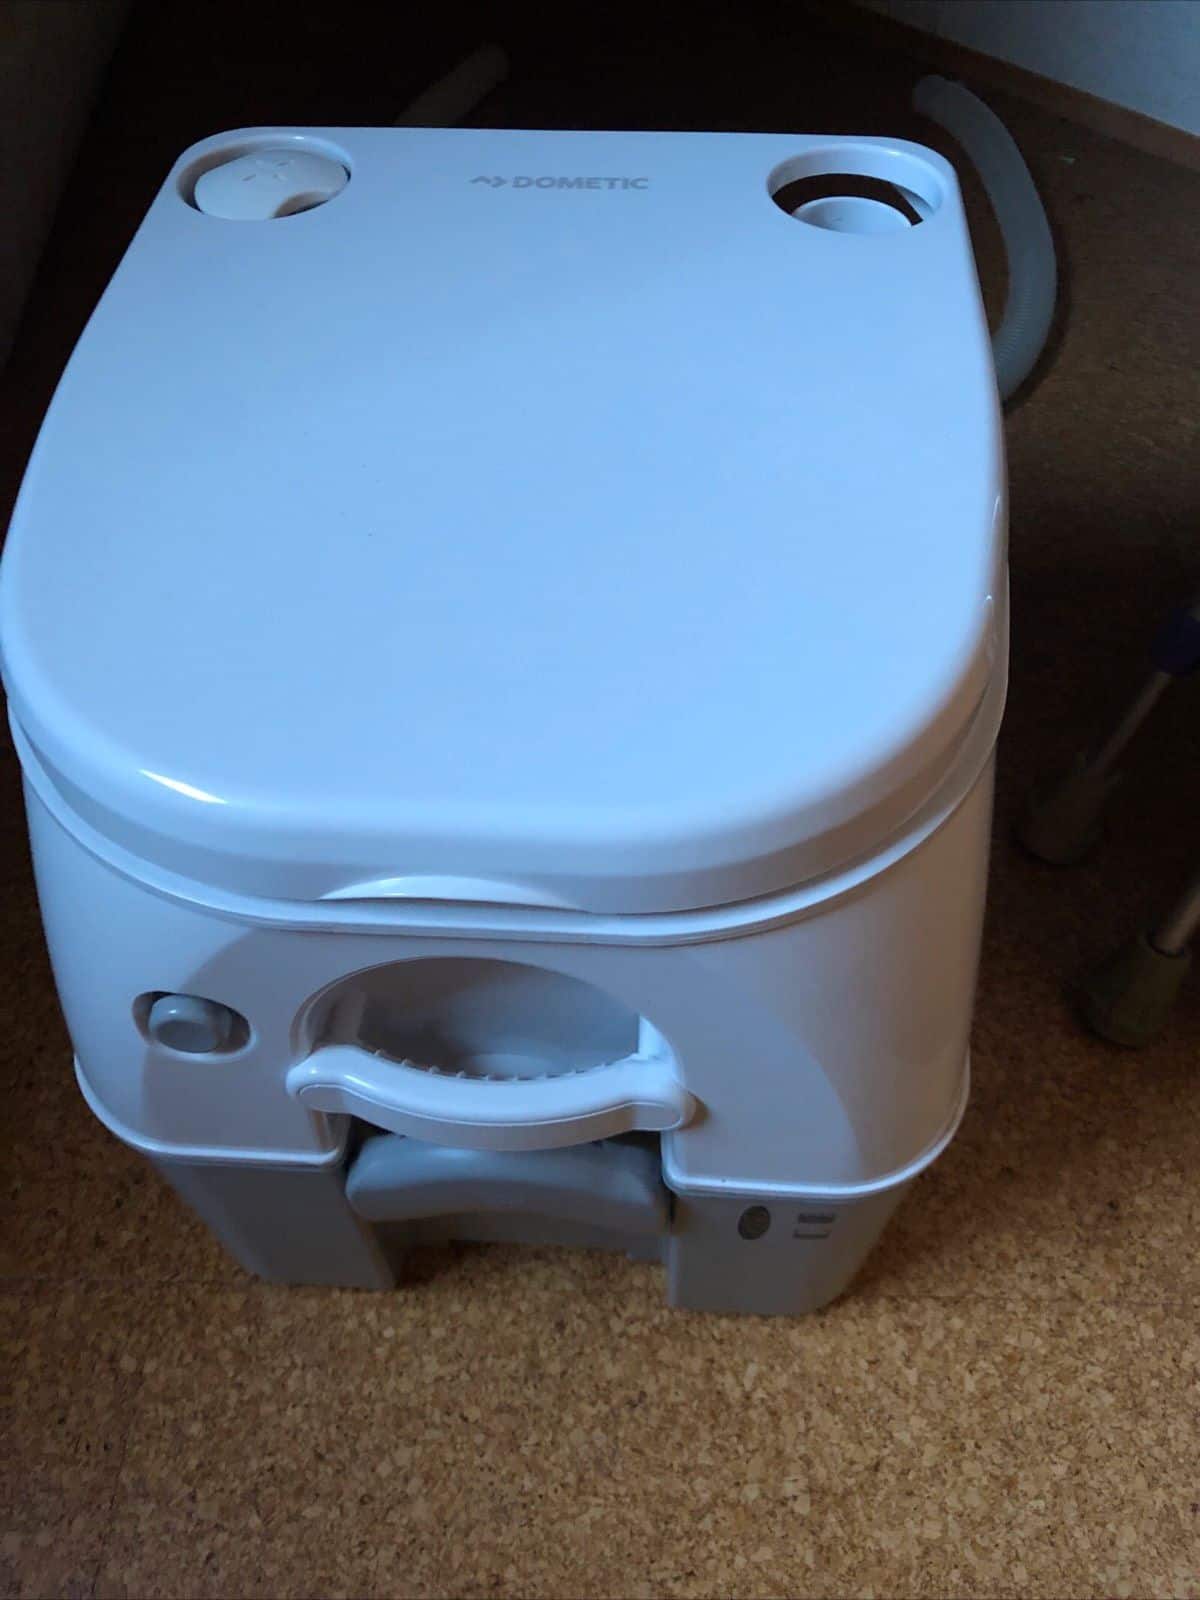 Dometic Portable 976 Camping-Toilette Test